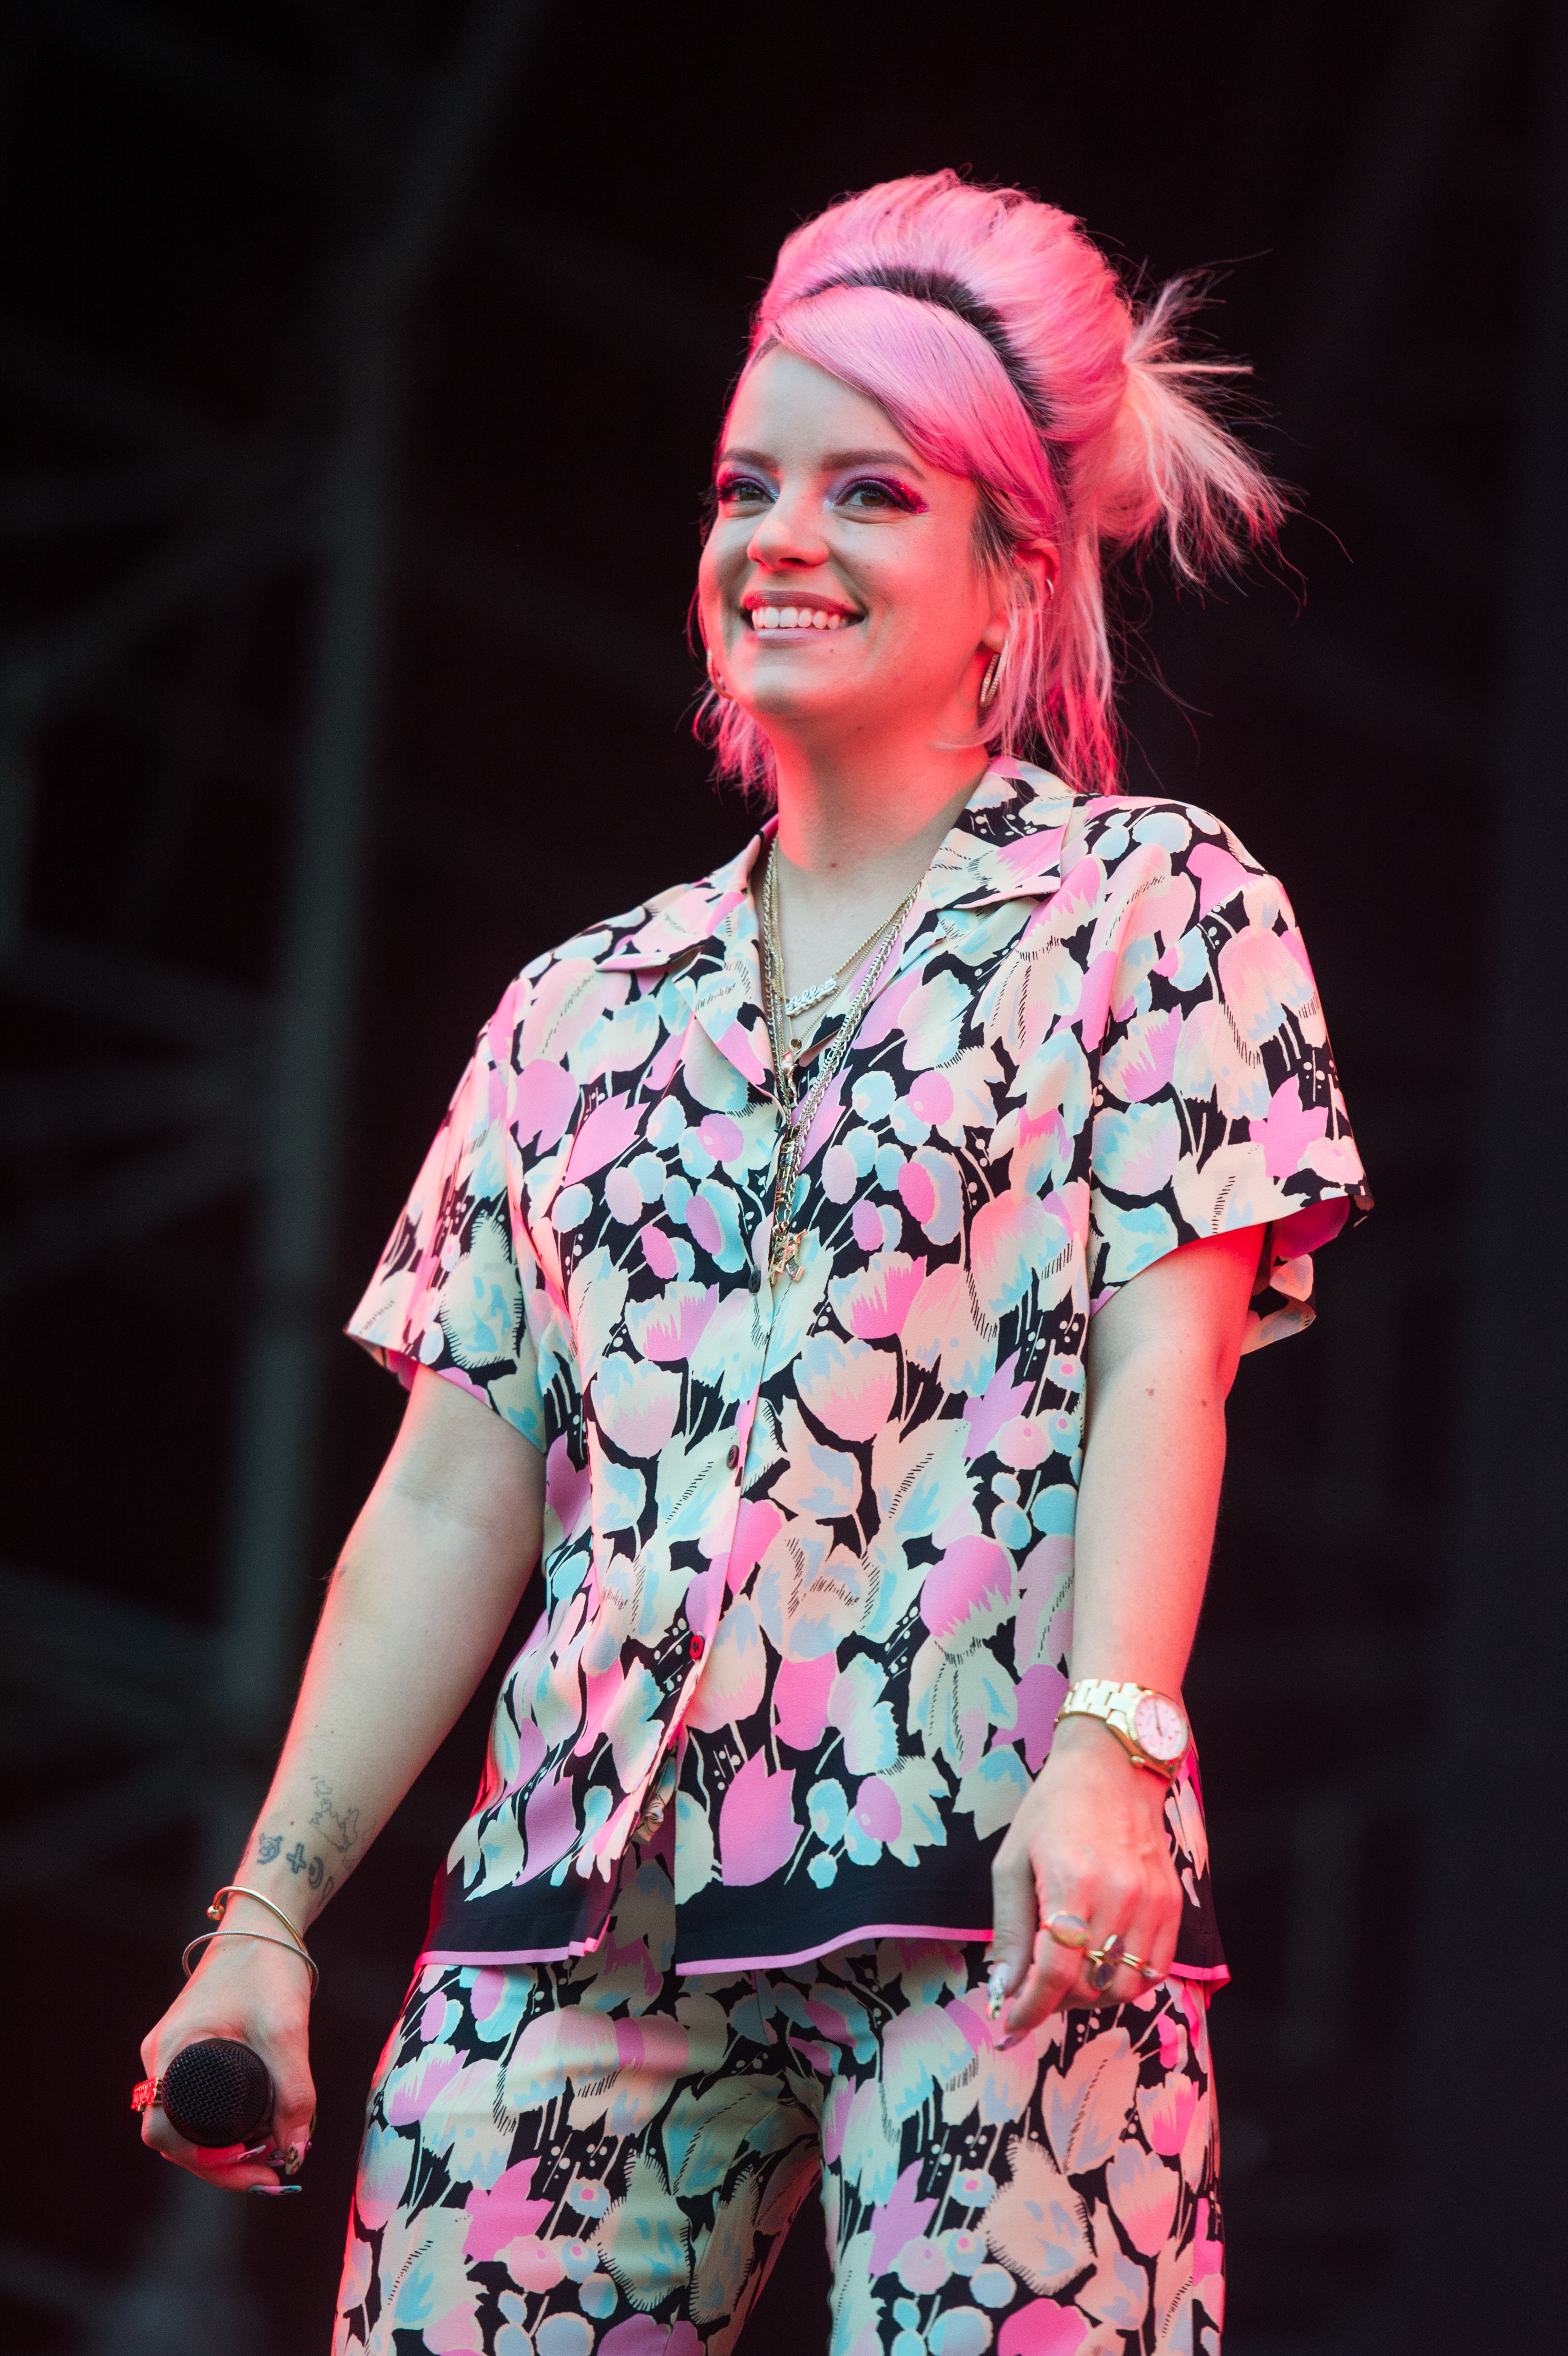 Lily Allen smiling on stage in a floral outfit with a microphone in hand